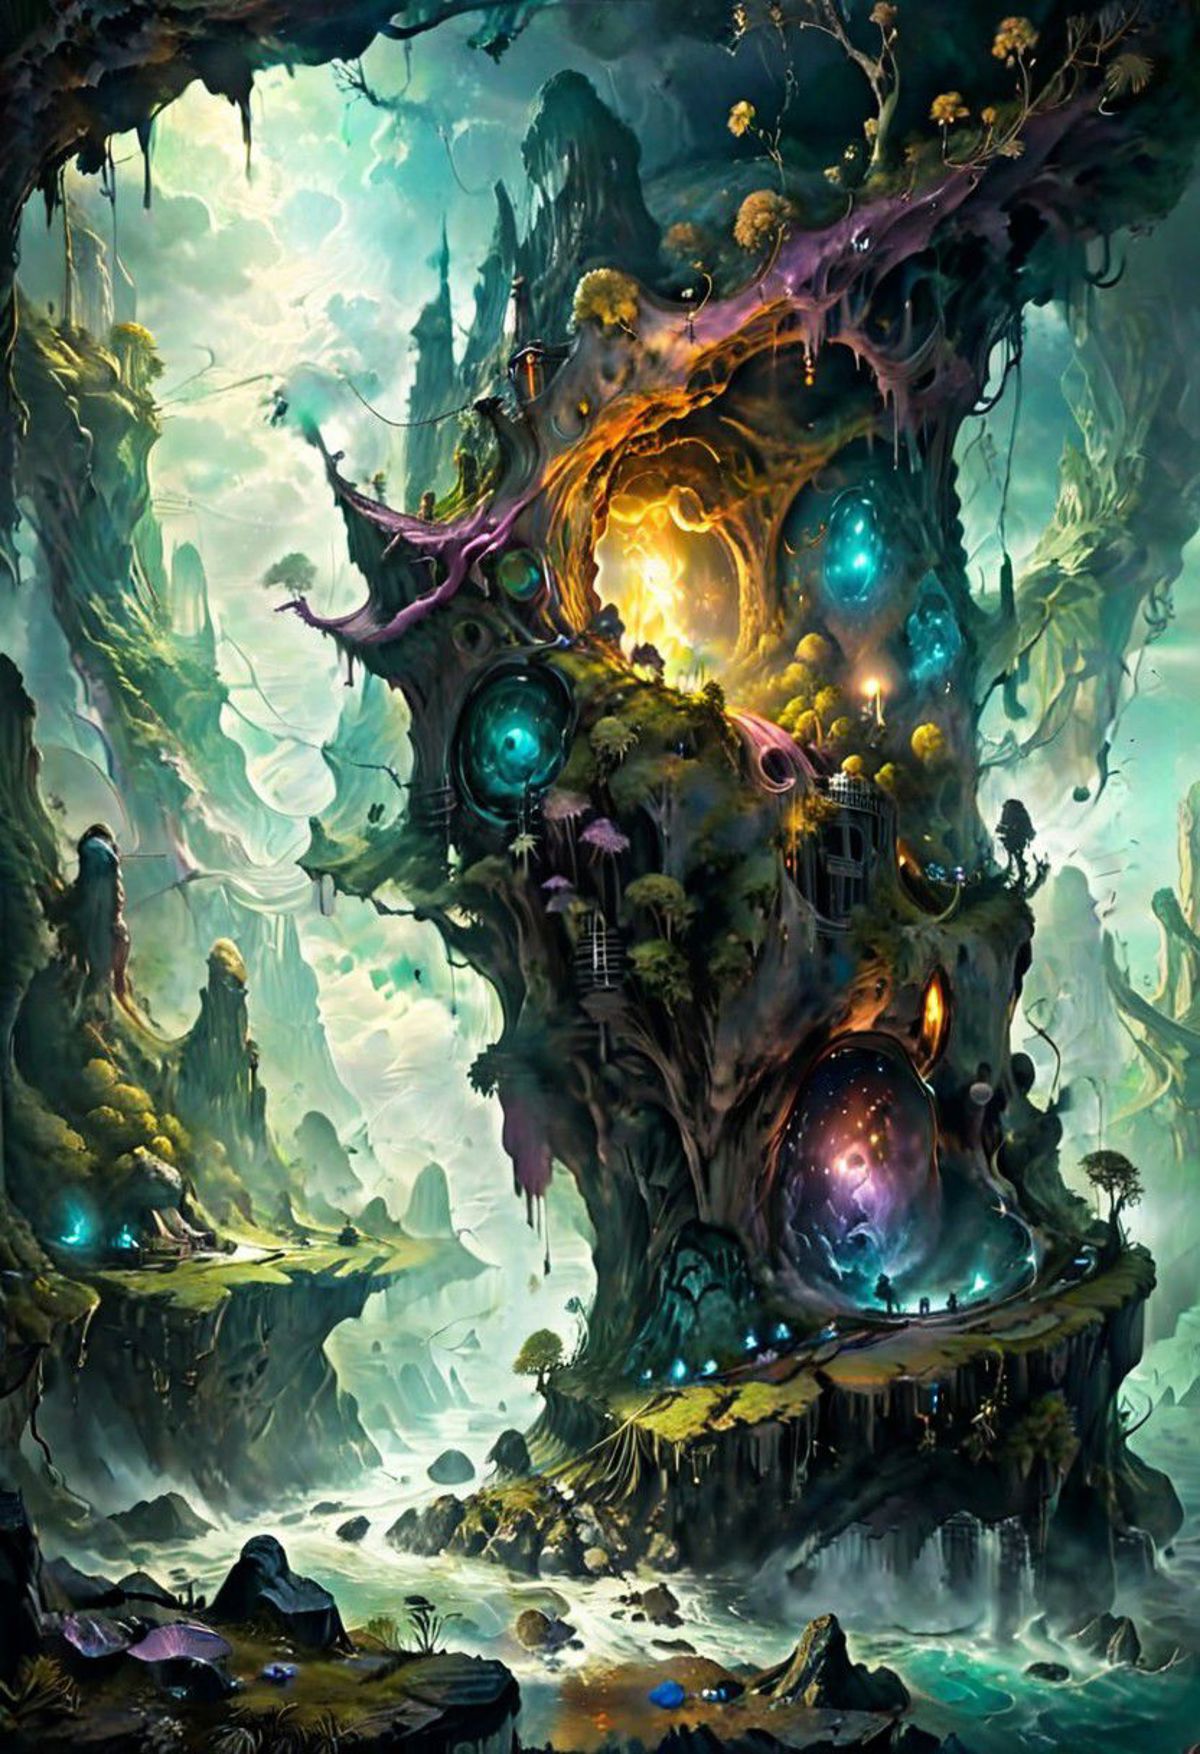 Fantasy artwork of a colorful tree with a dragon and a cave, surrounded by mountains and mushrooms.